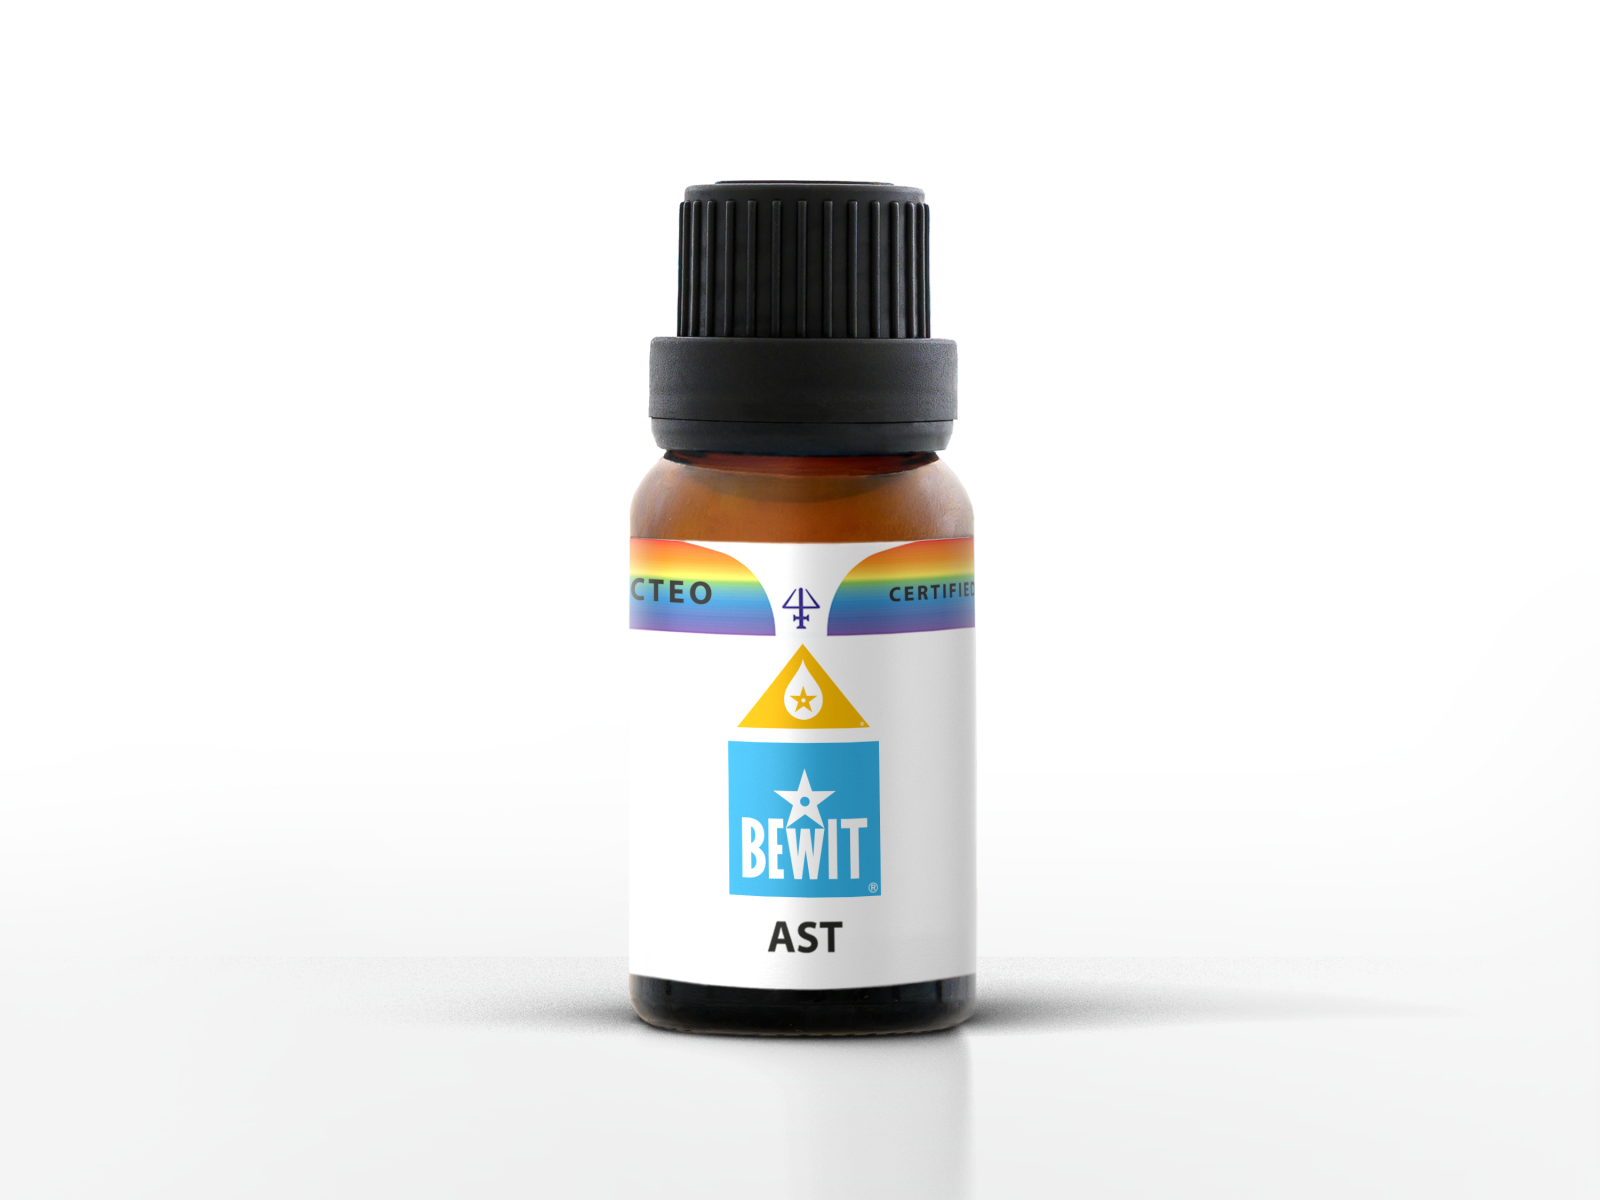 BEWIT AST - 100% natural essential oil blend in CTEO® quality